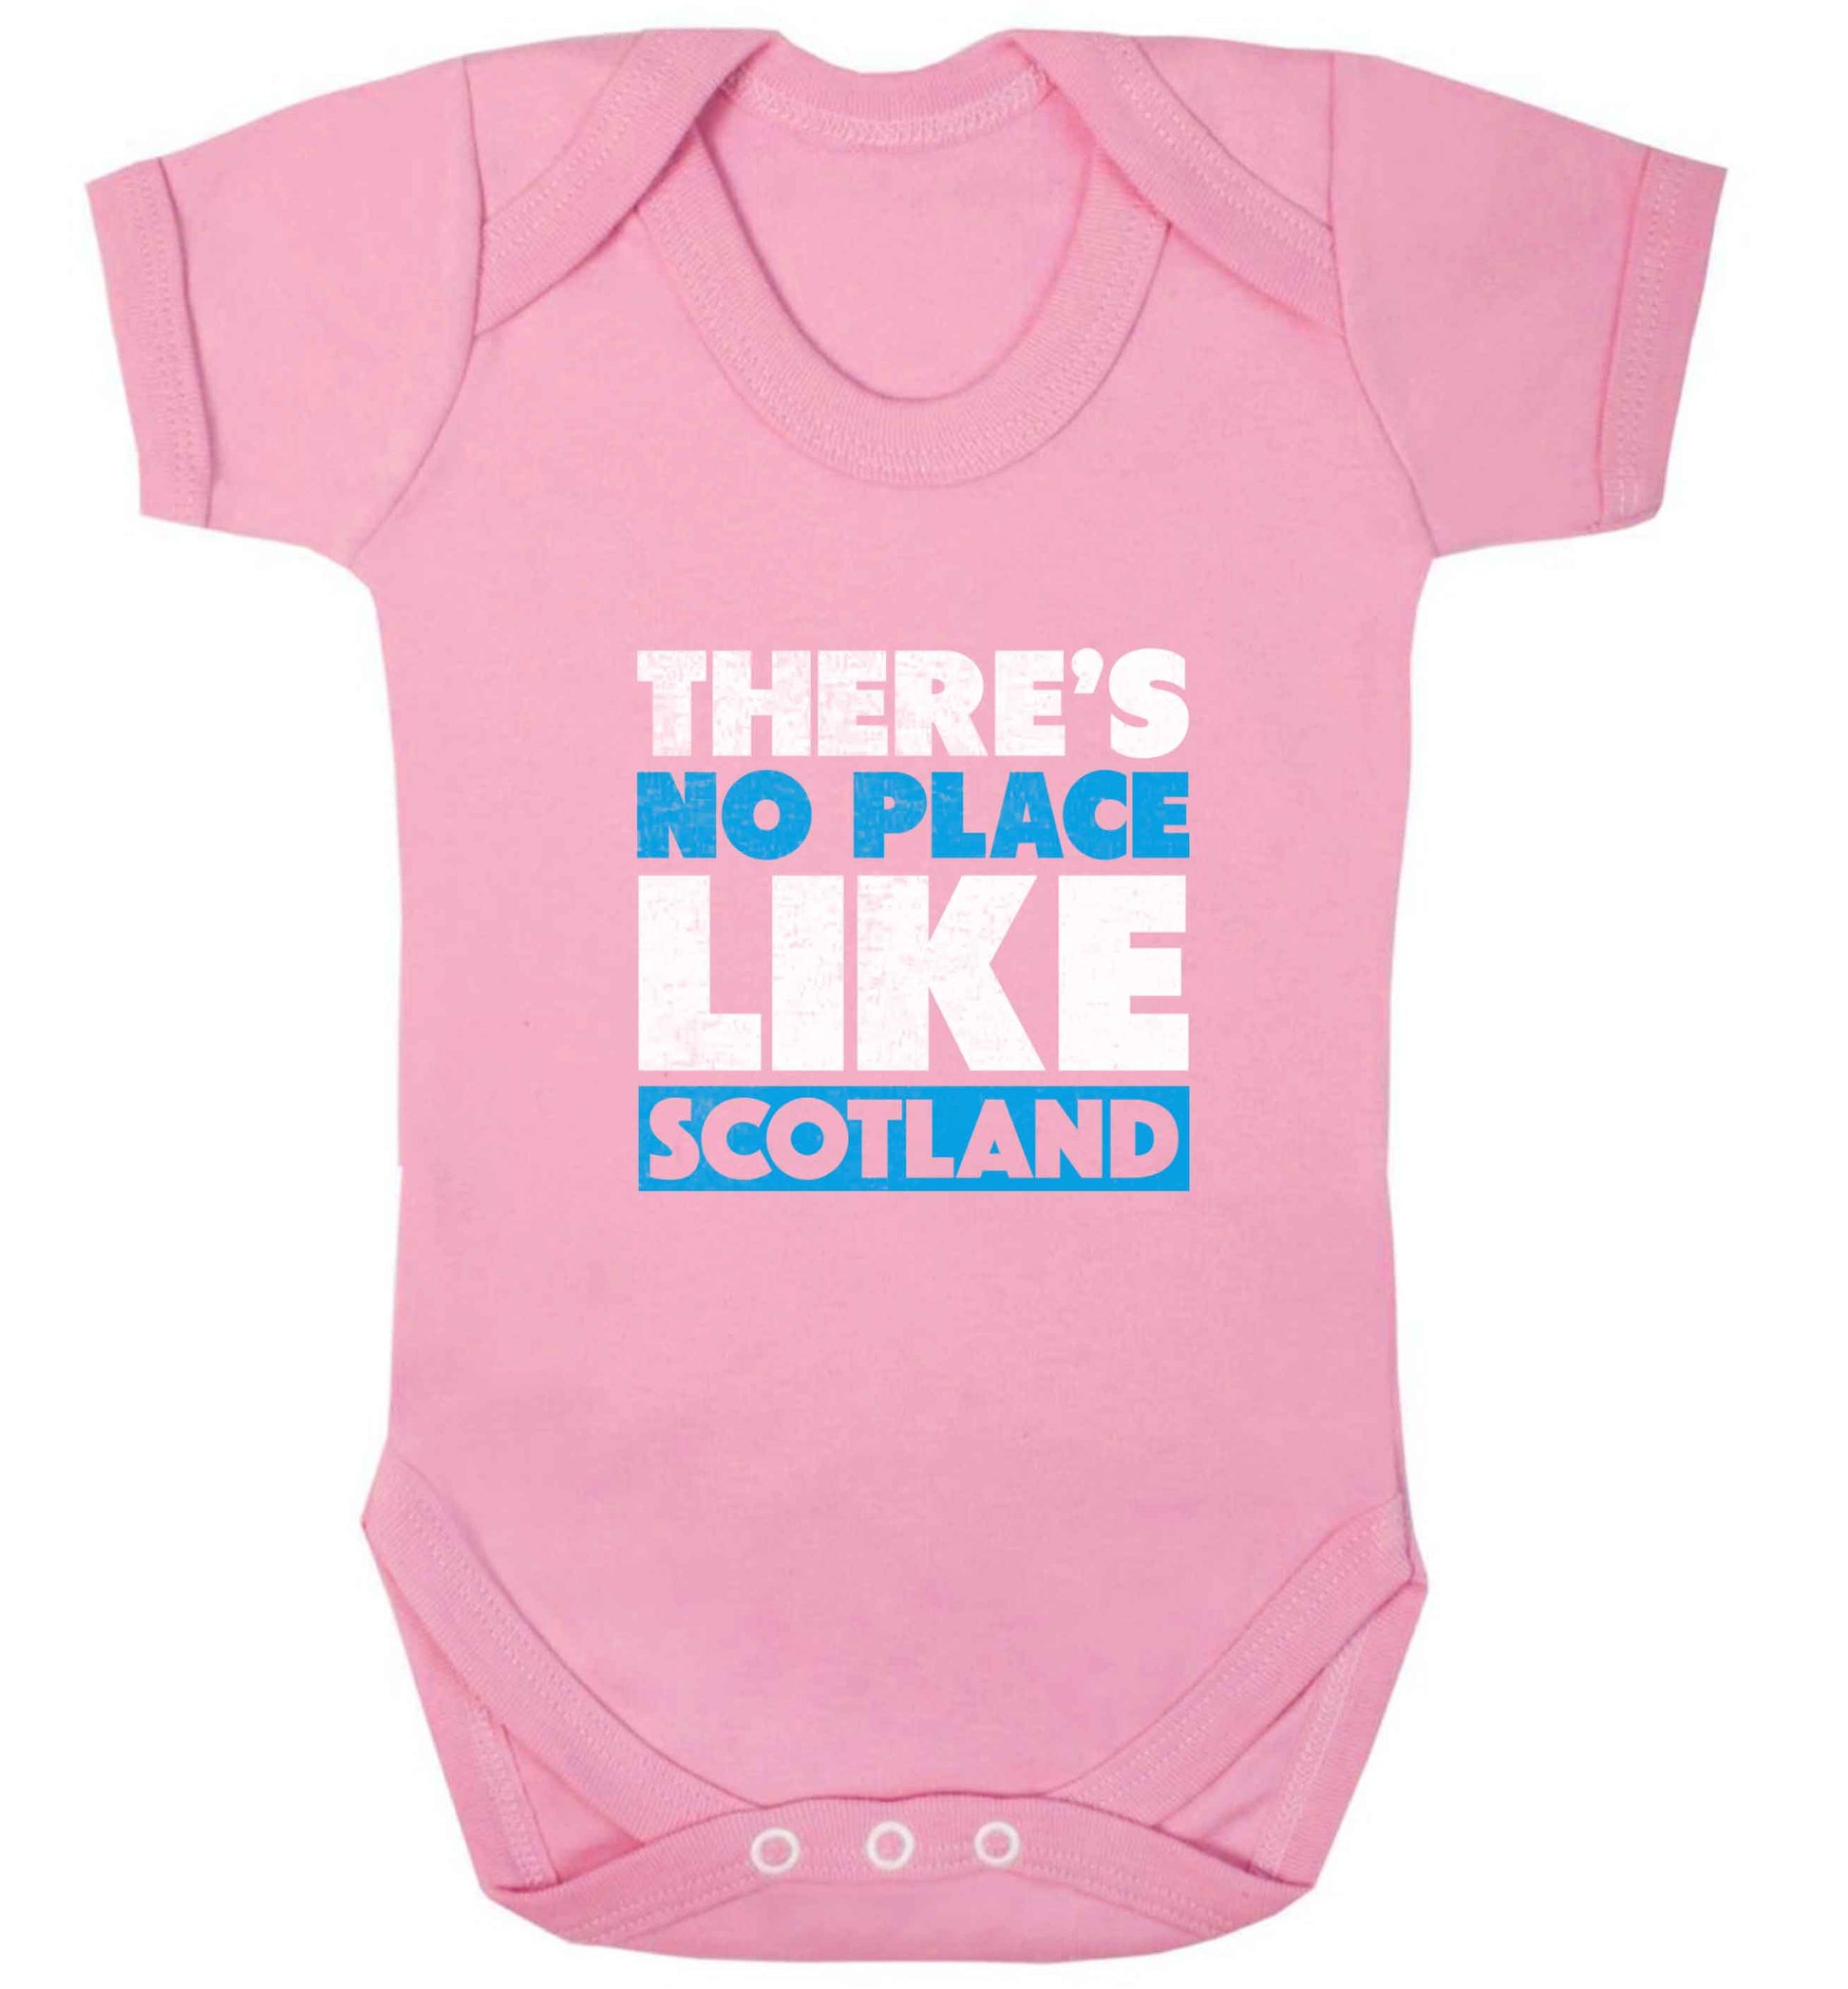 There's no place like Scotland baby vest pale pink 18-24 months